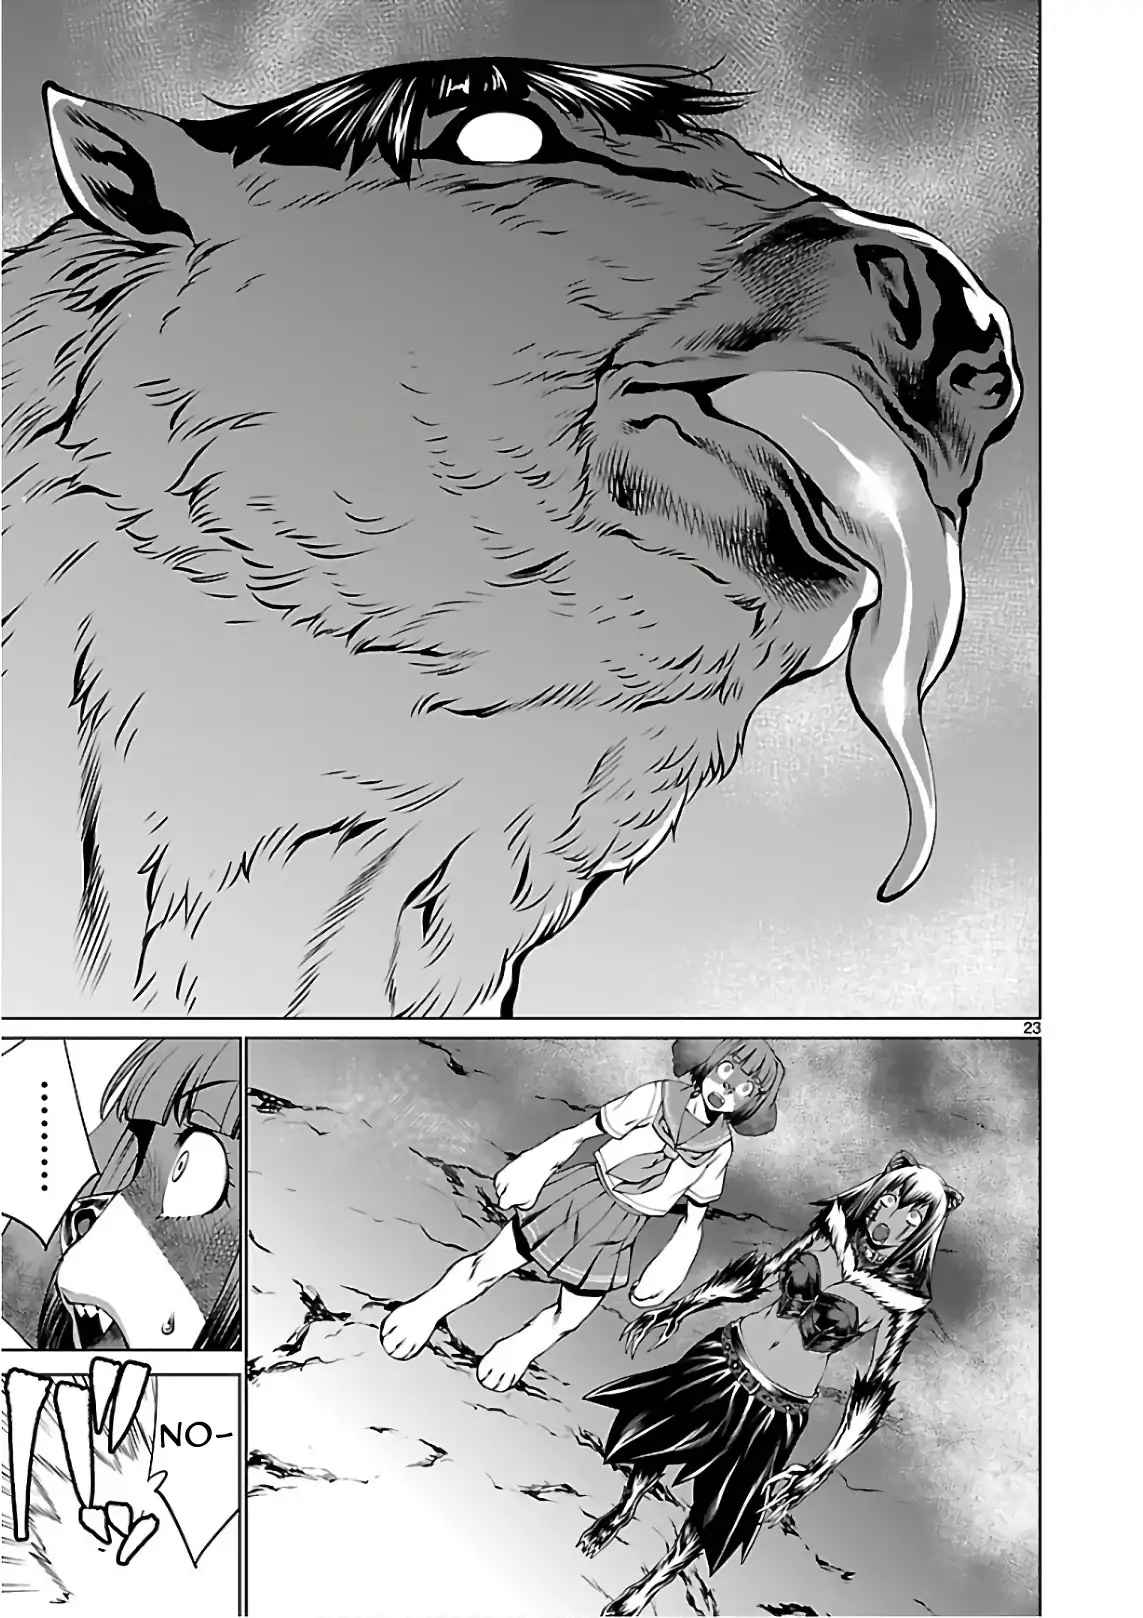 Killing Bites Vol. 11 Ch. 54 They're All Going to Die!